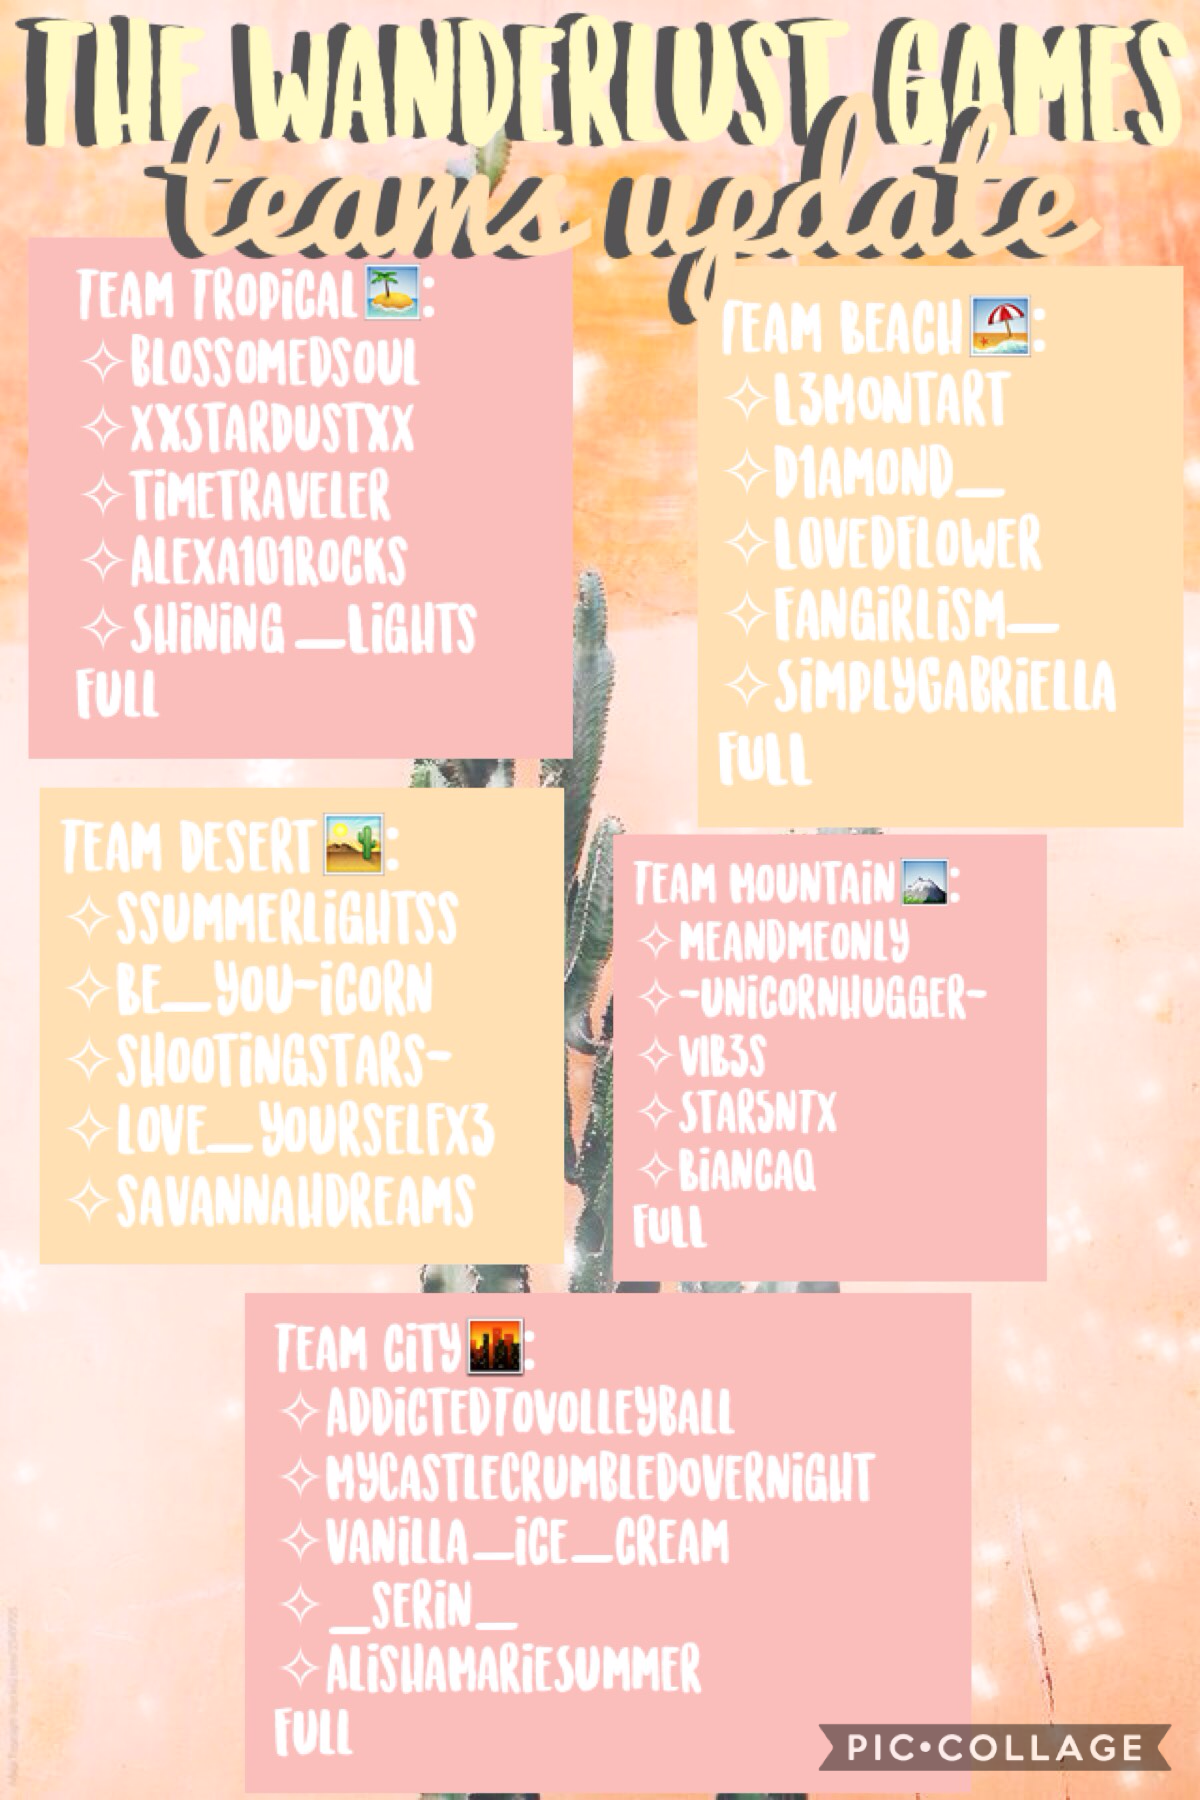 THE FINAL TEAMS. I am thinking about opening up a new team called Team Ocean so let me know if you aren't already signed up but would like to join.